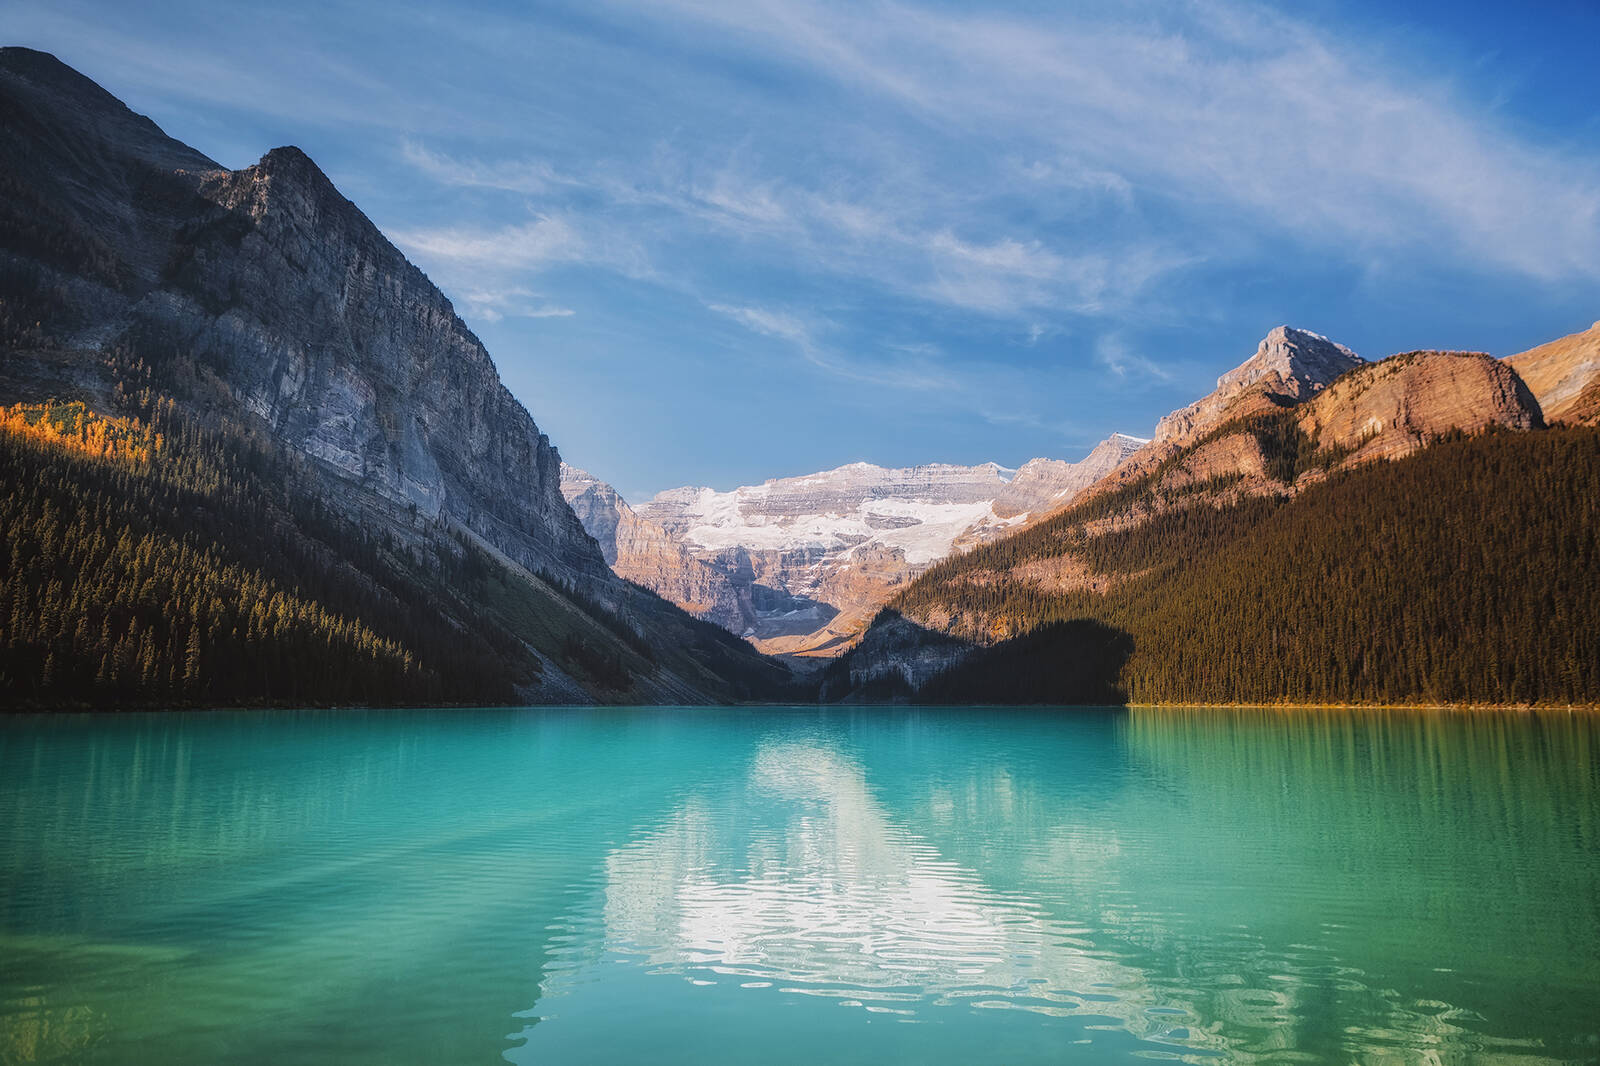 Image of Banff National Park Alberta, Canada by Ryan Smith